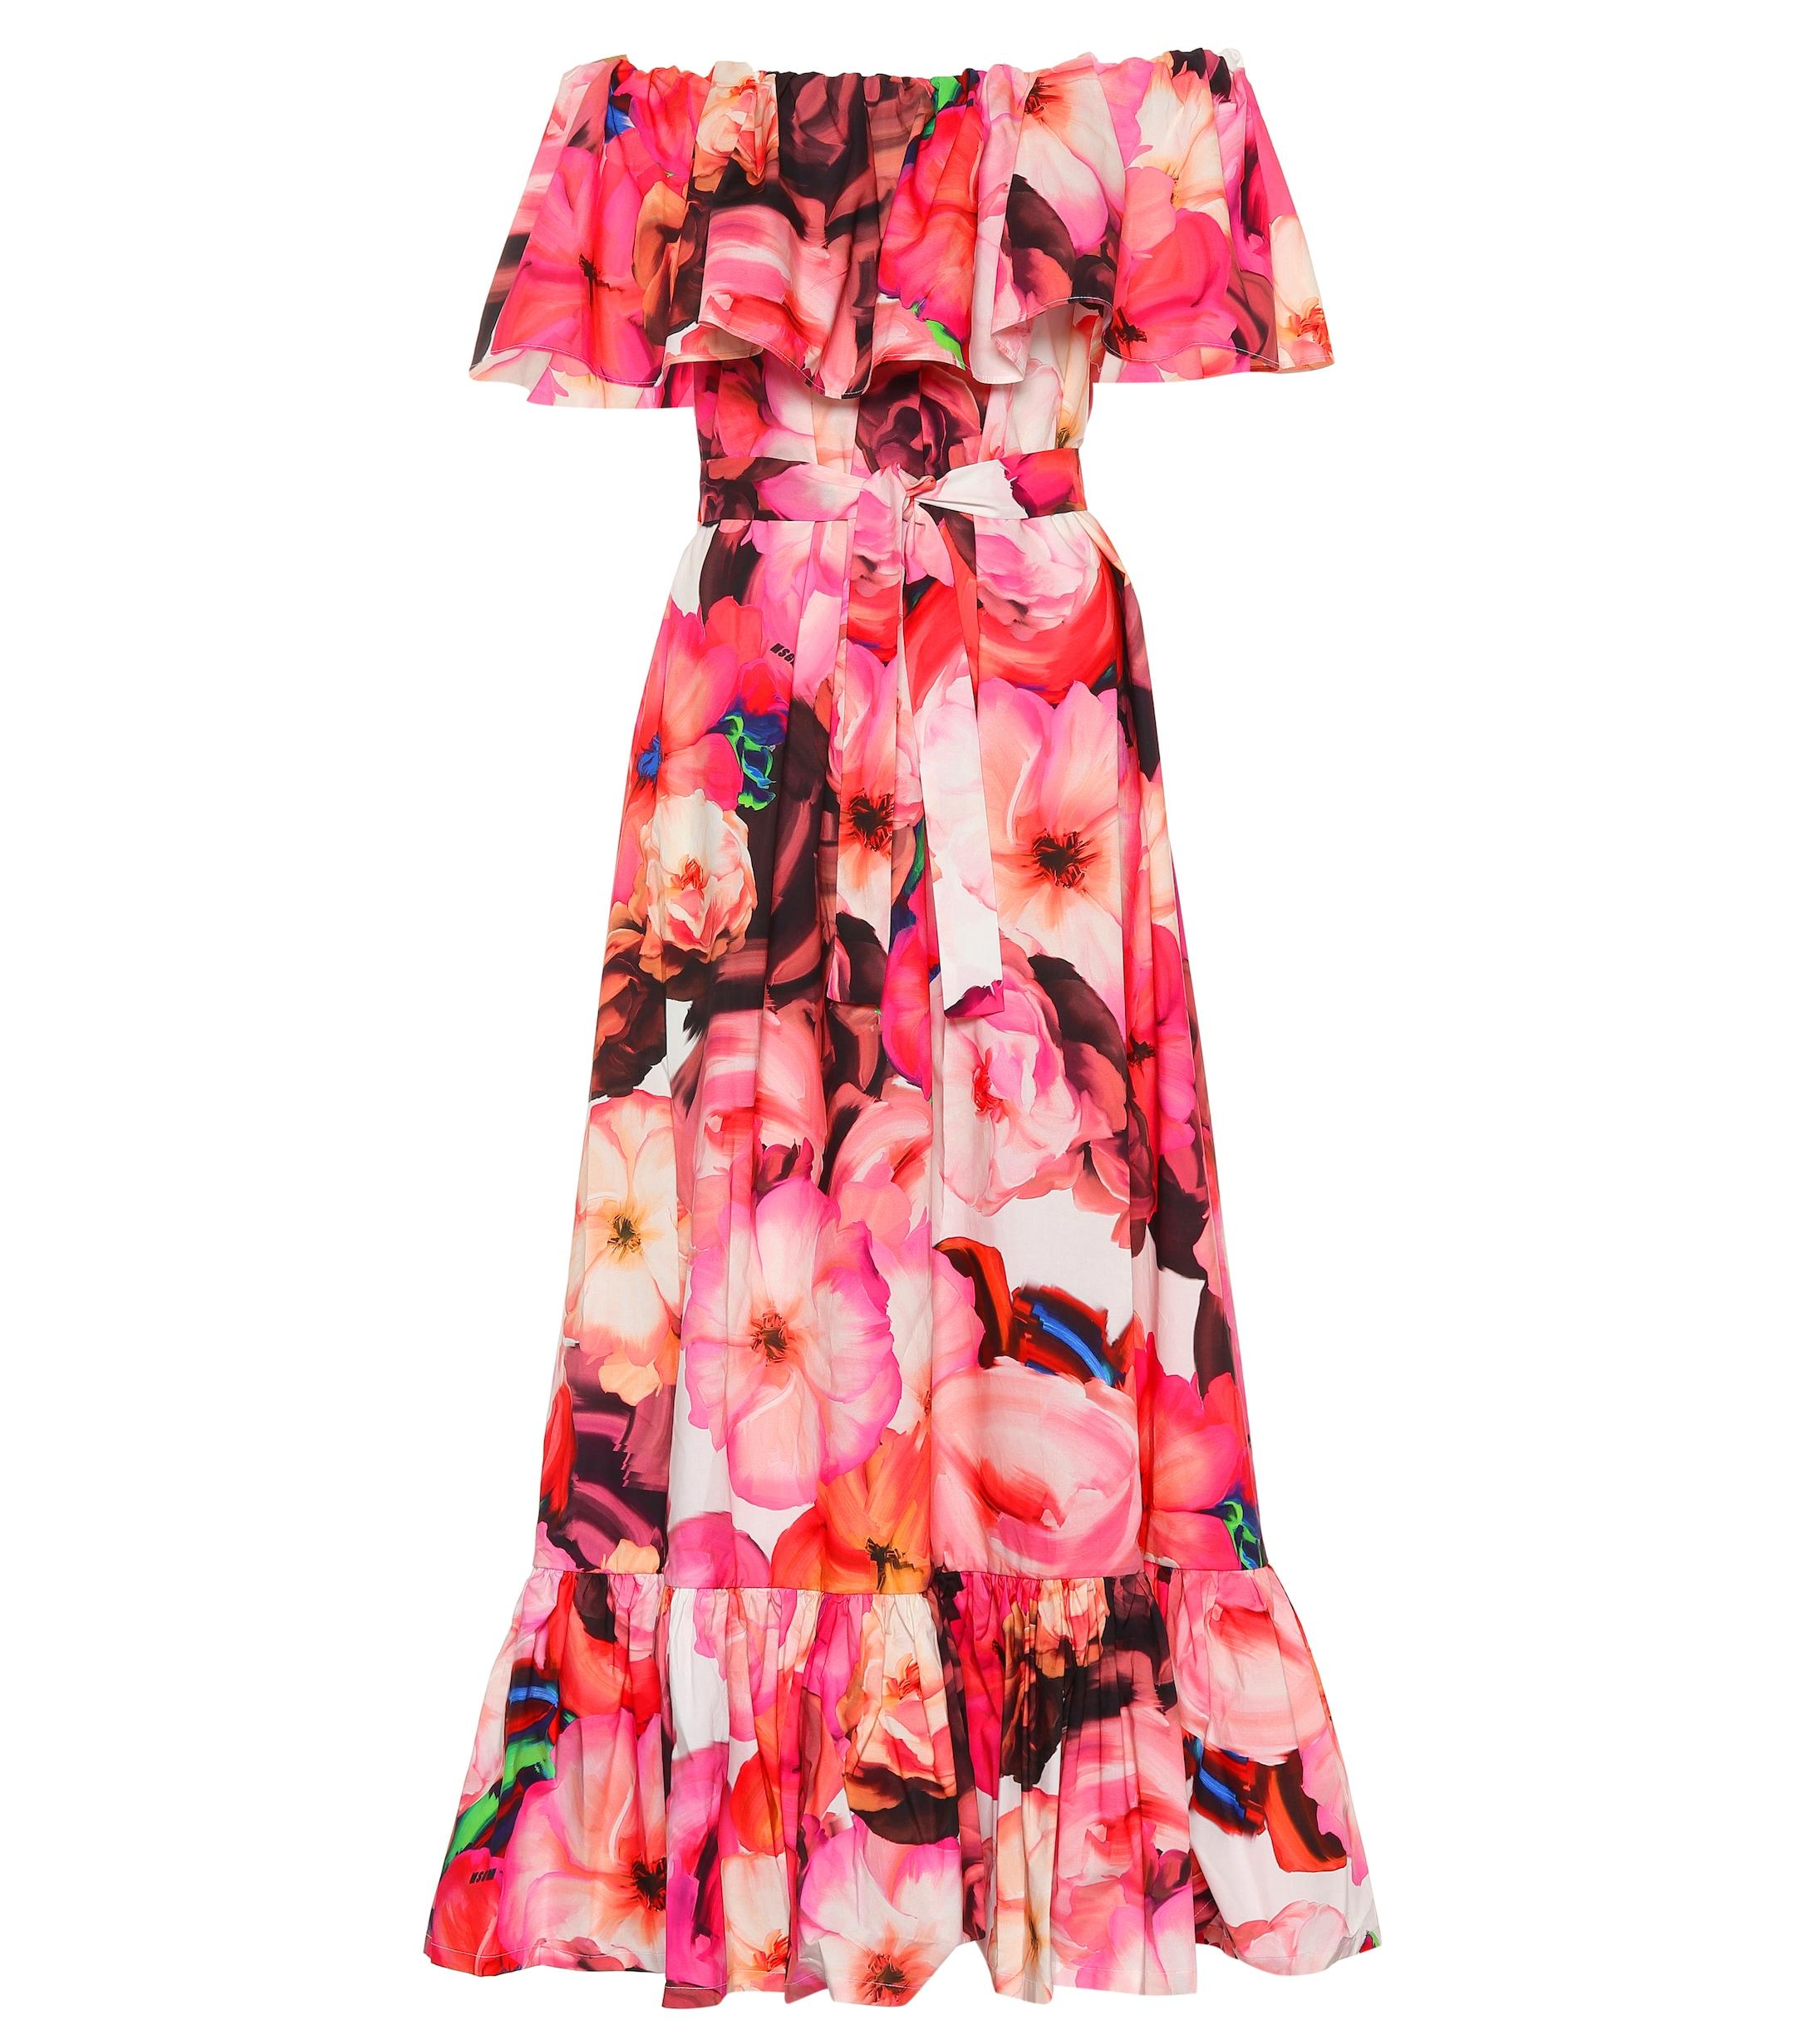 MSGM Floral Cotton Maxi Dress in Pink - Lyst